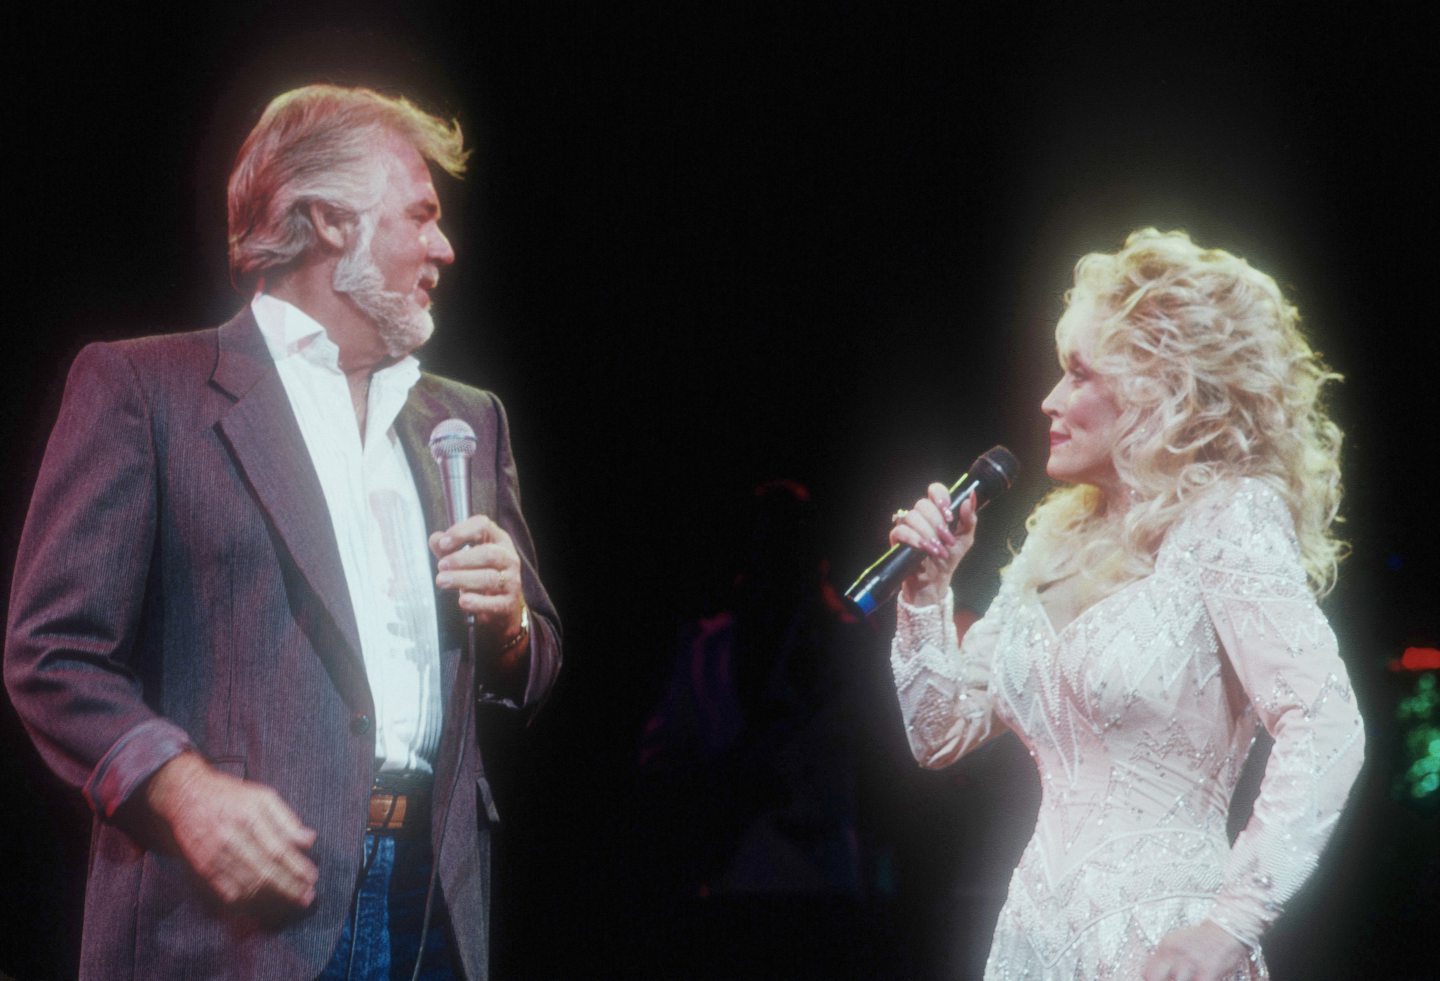 Kenny Rogers and Dolly Parton performing on stage in the 1980s.